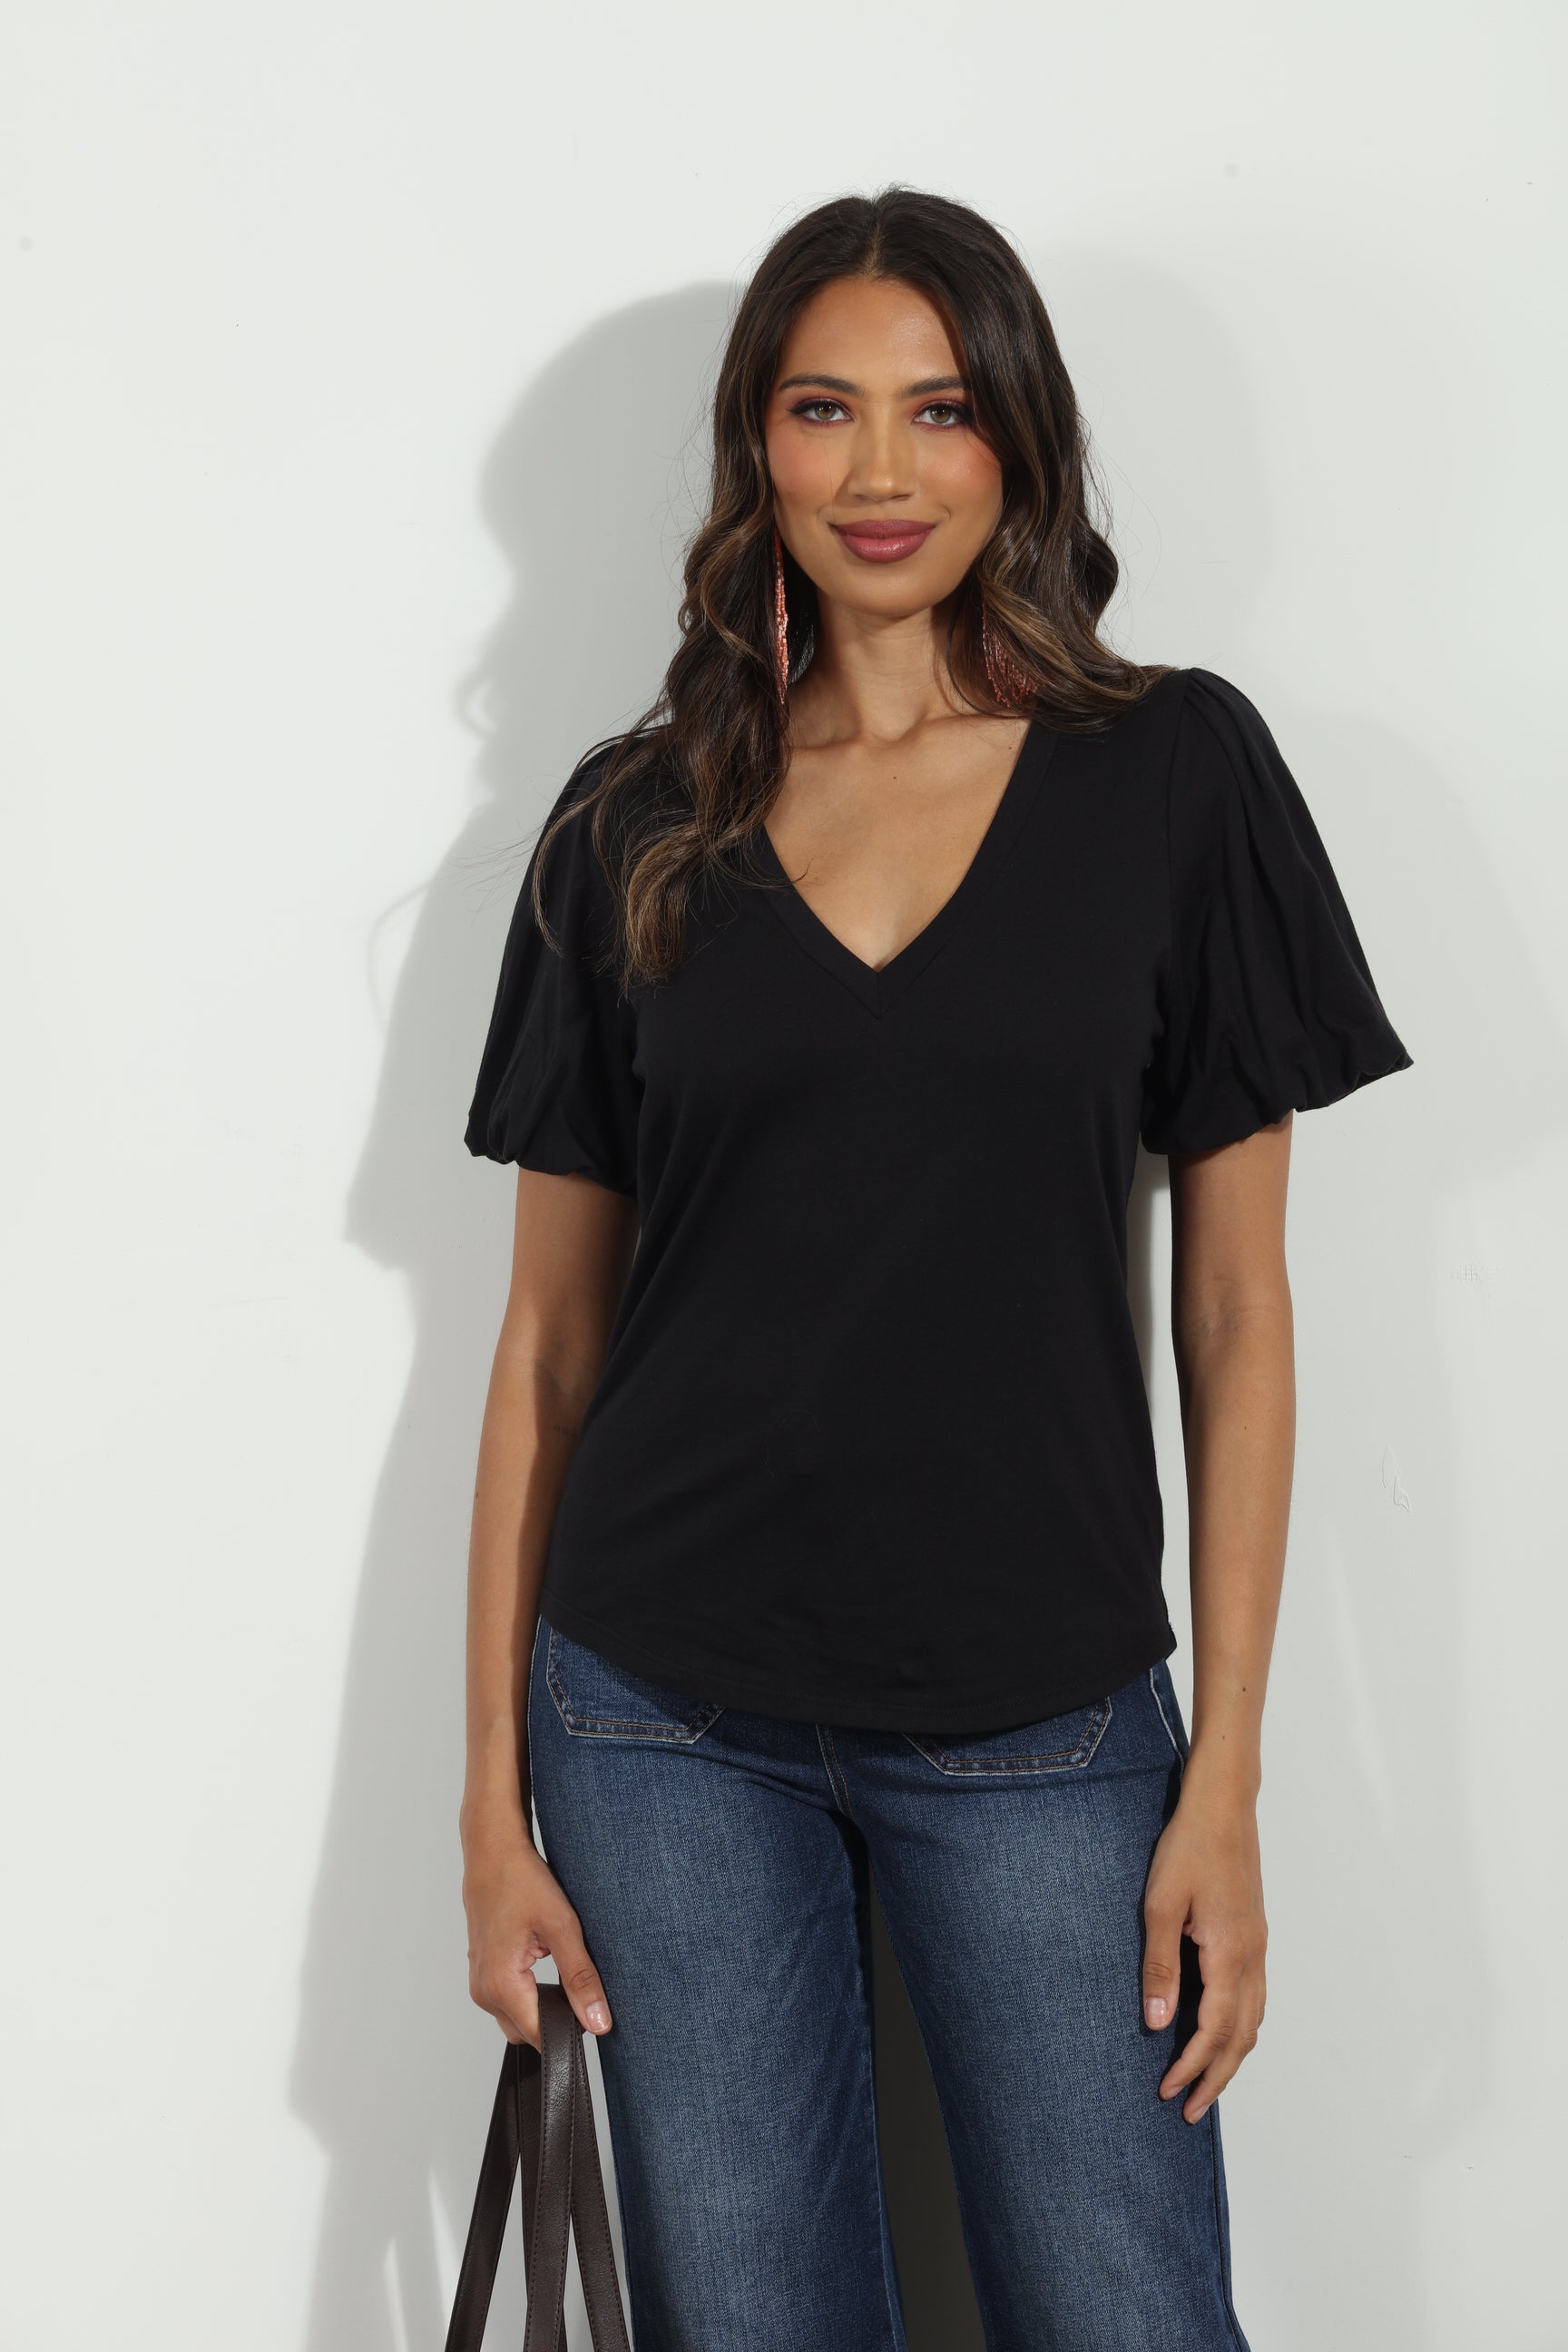 Black Cotton Puff Sleeve Tee-New Color